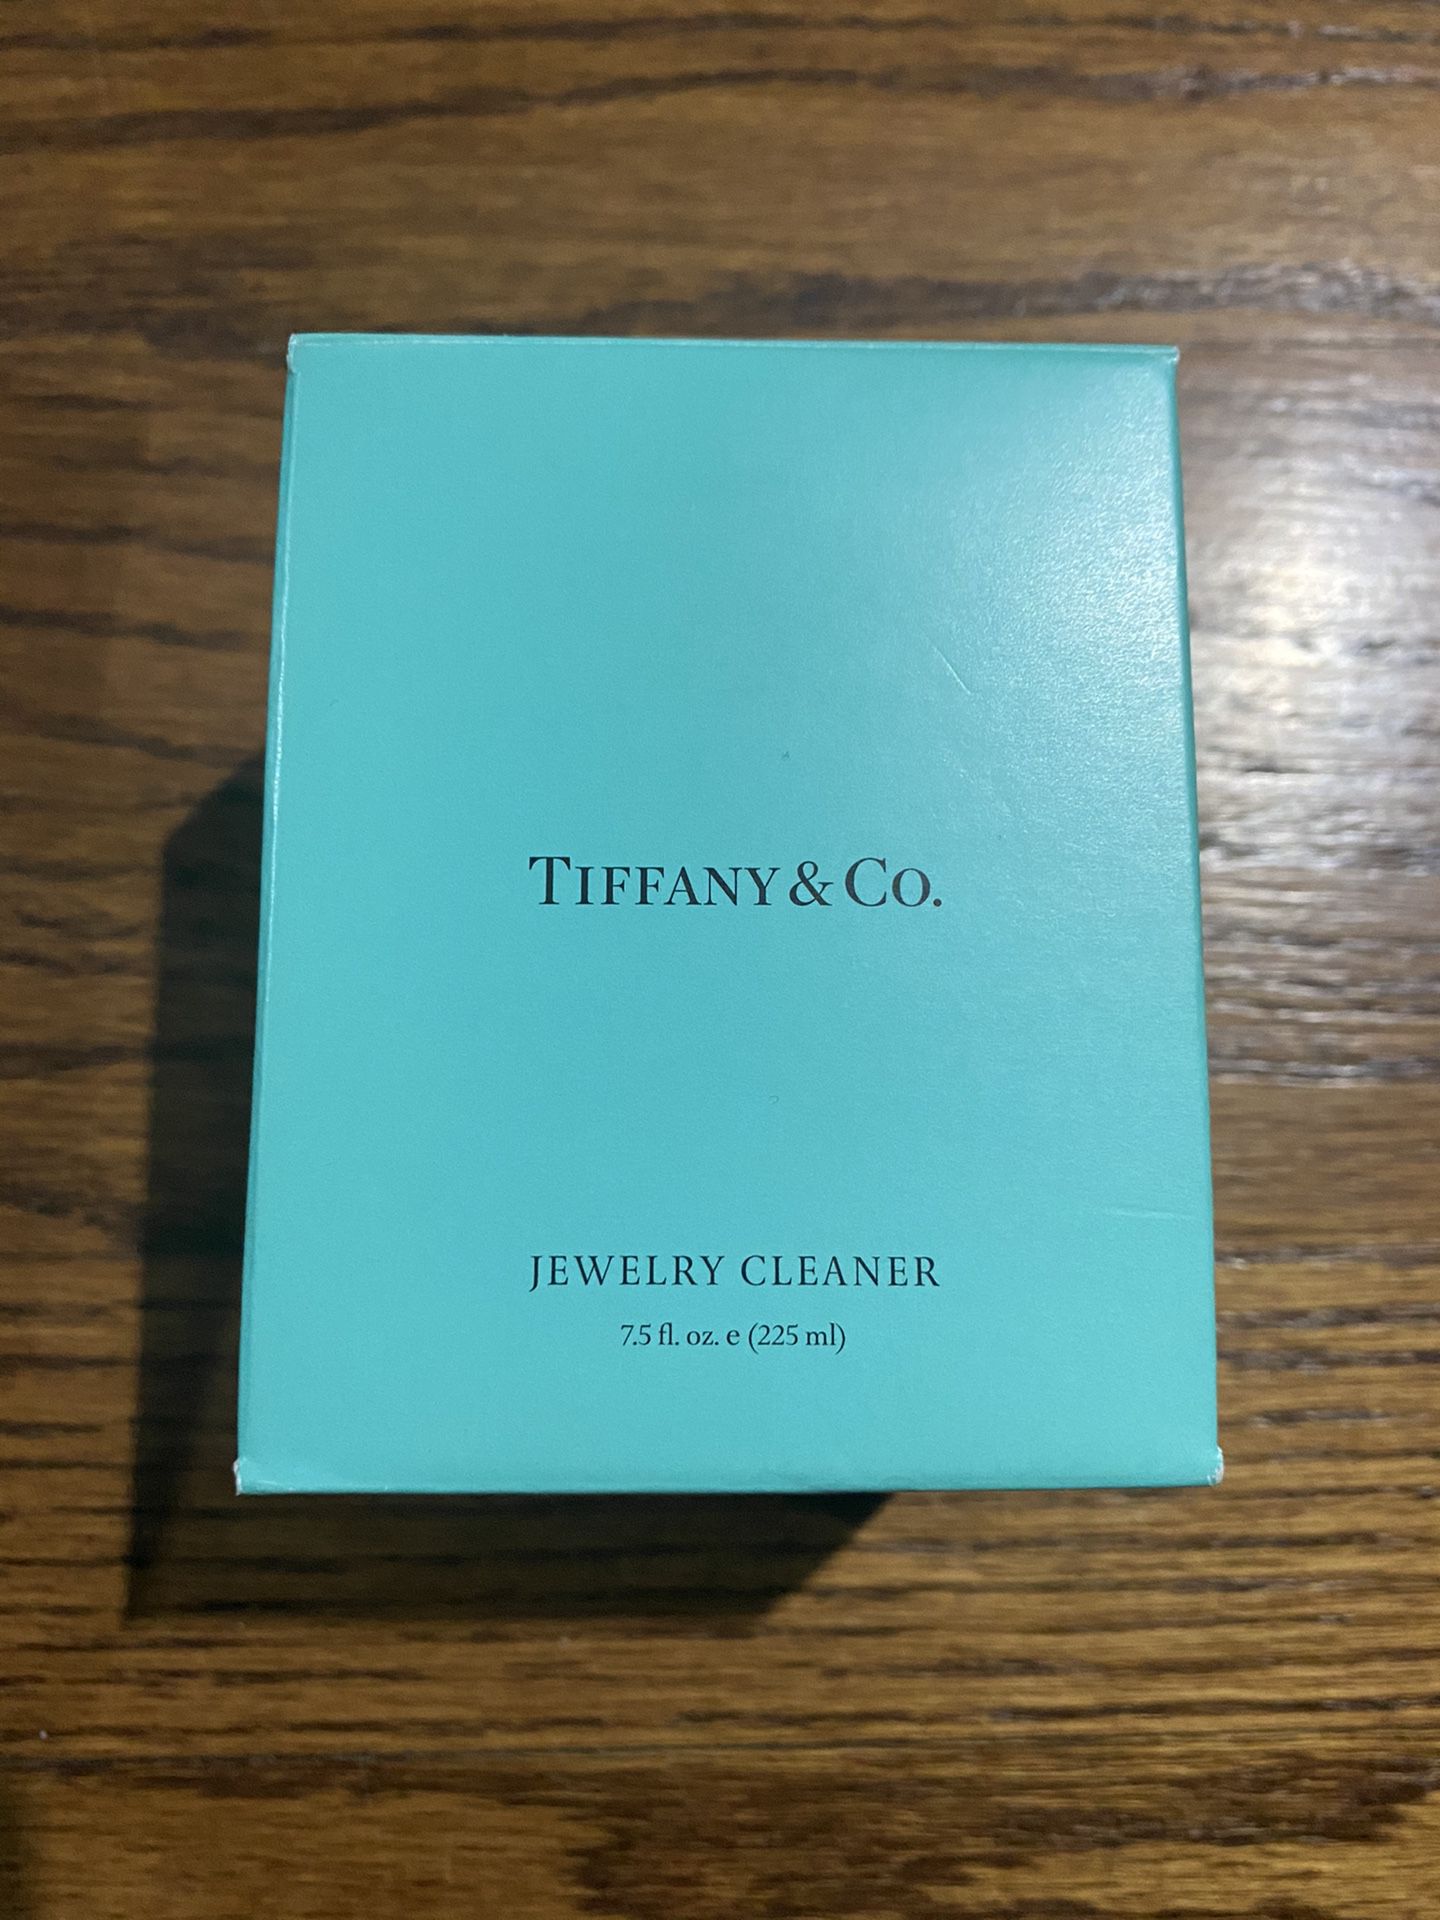 Tiffany&Co jewelry cleaner